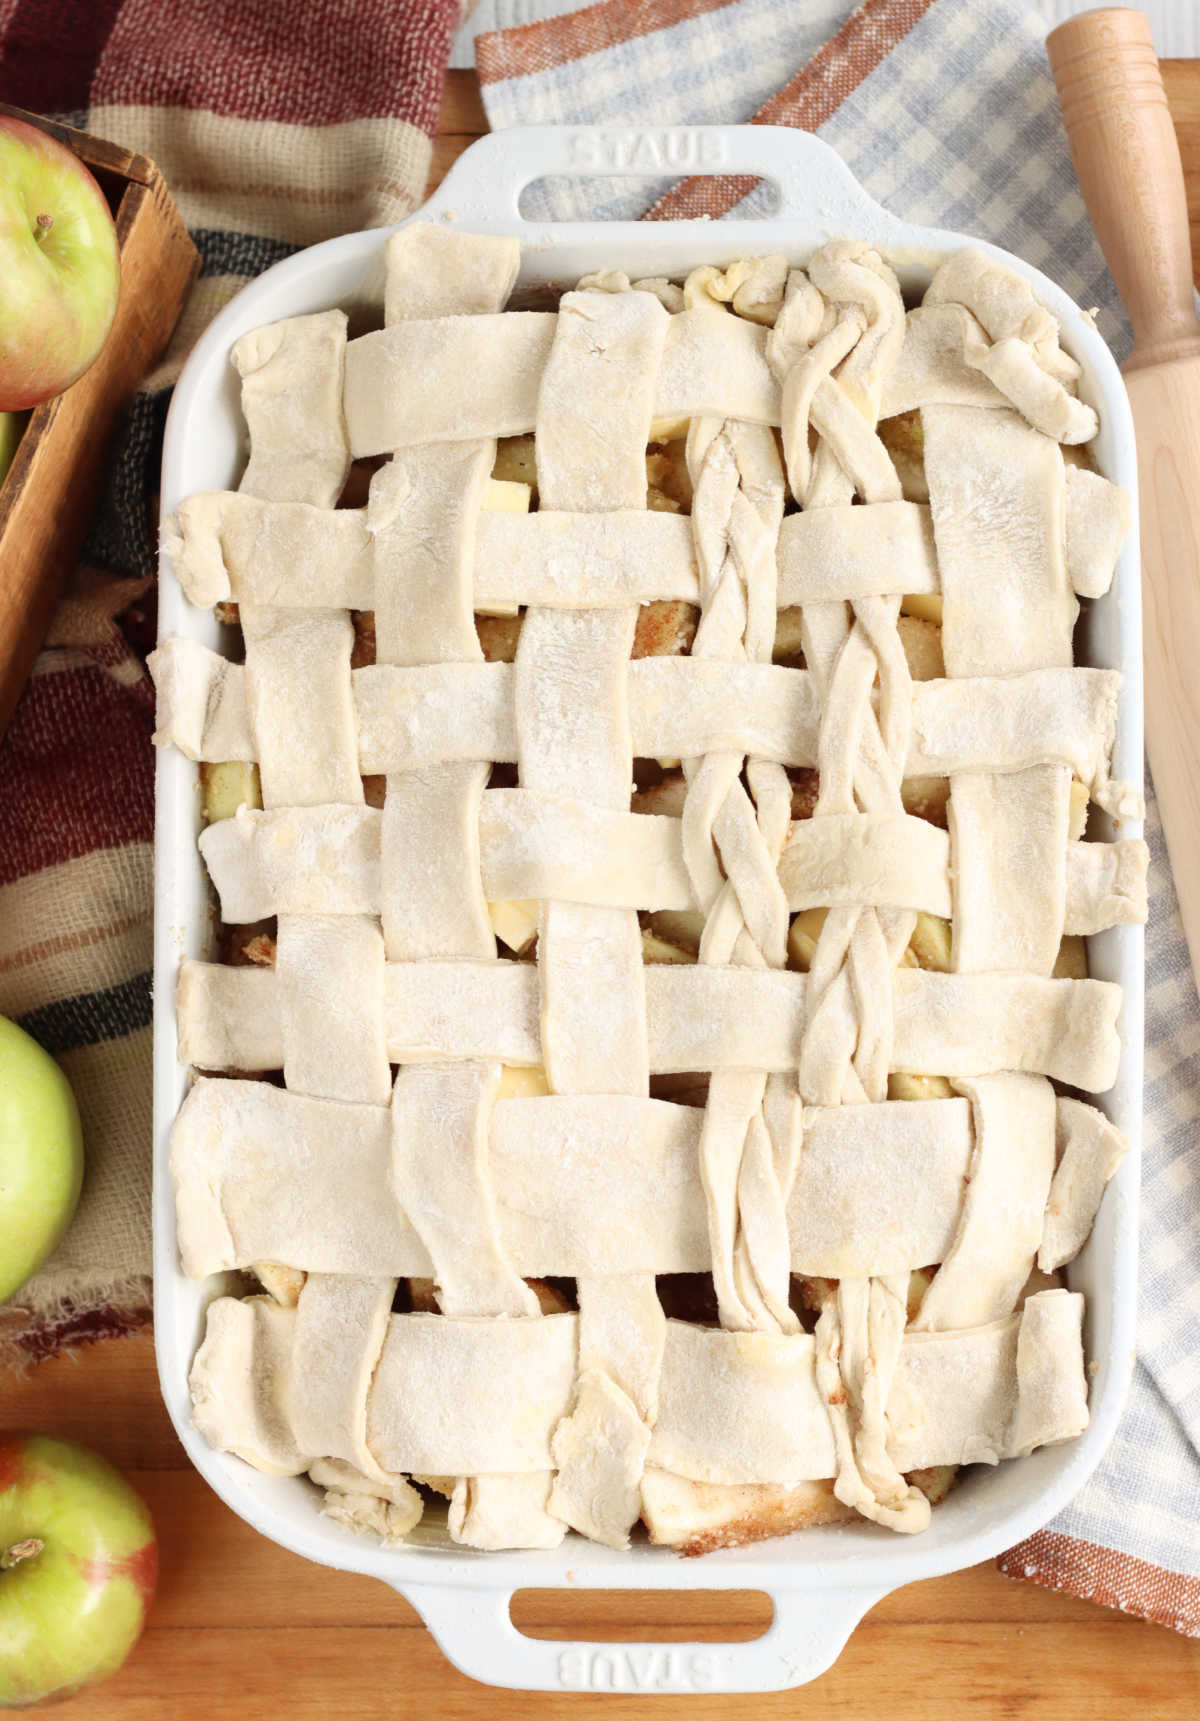 Unbaked apple cobbler with lattice pie crust in white baking dish on wooden cutting board, apples around.